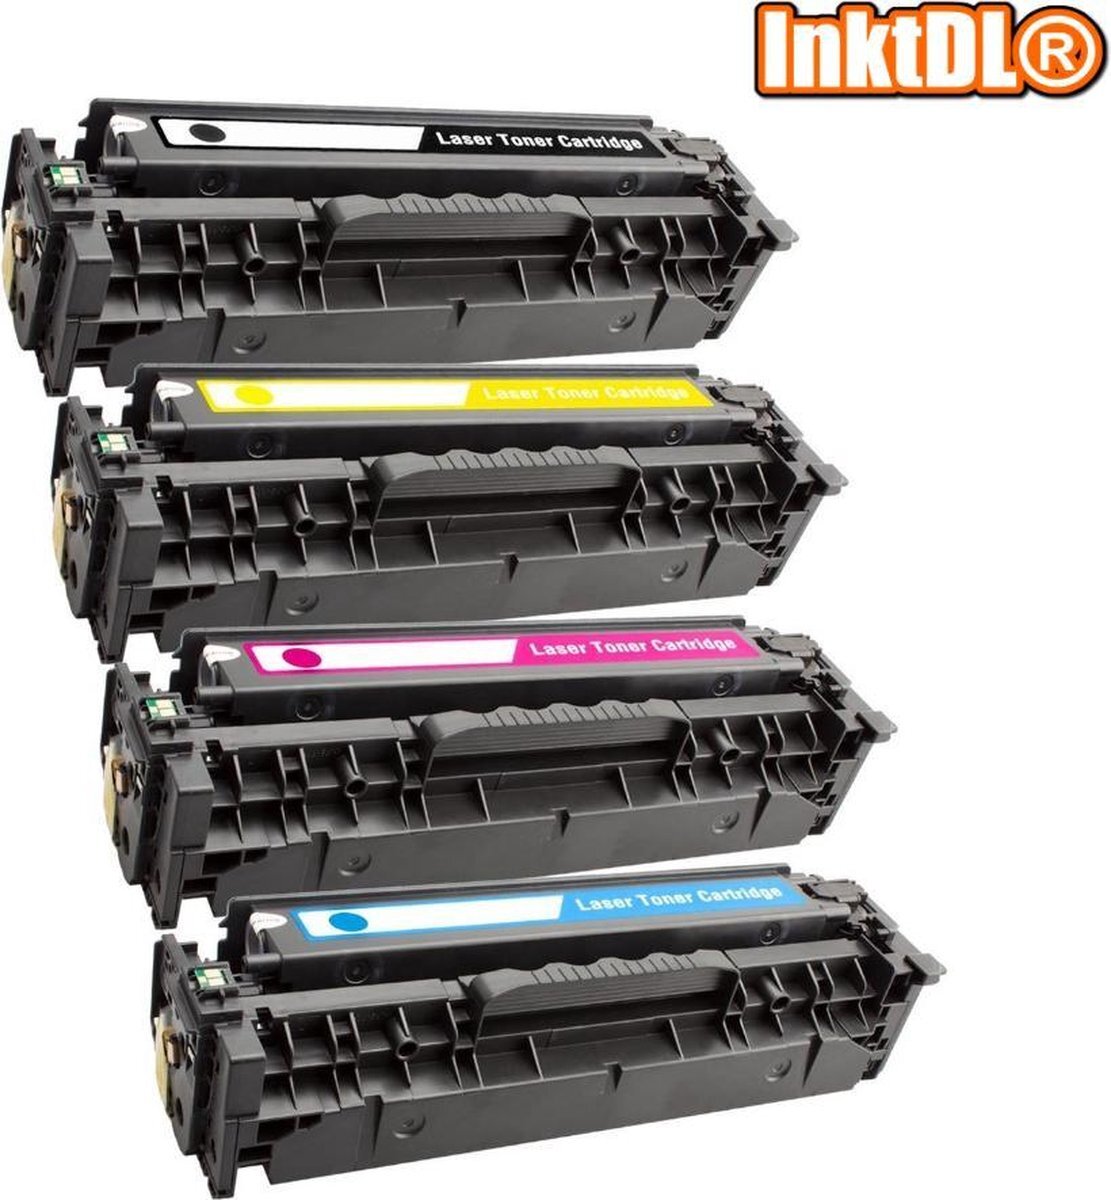 InktDL Compatible XL Multipack Laser toners cartridge voor HP 312A / 312X (CF-380X, CF-381A, CF-382A en CF-383A) | Geschikt voor HP Color Laserjet Pro M476DN, M476DW, M476NW, MFP M476DN, MFP M476DW, MFP M476NW (Zwart, Cyaan, Magenta & Geel)